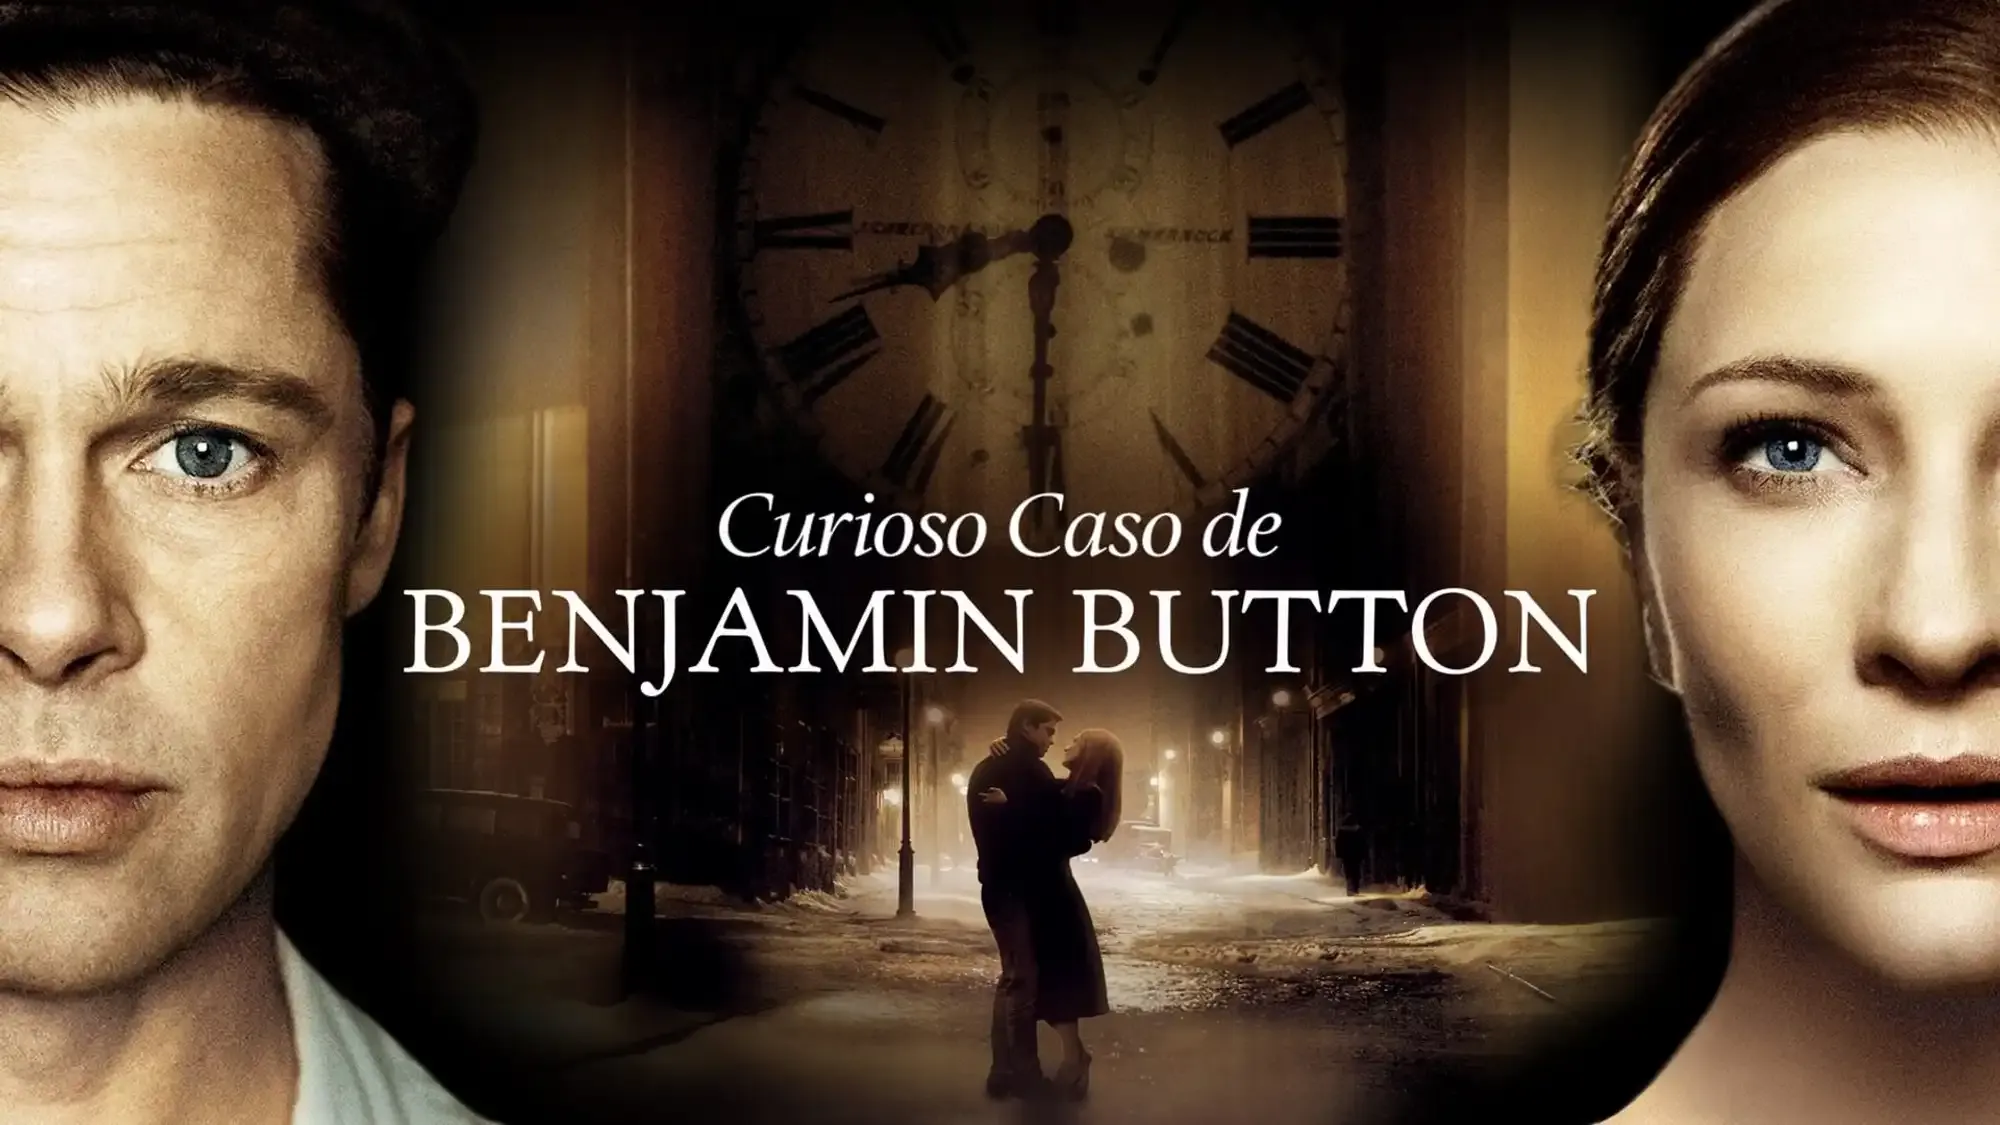 The Curious Case of Benjamin Button movie review